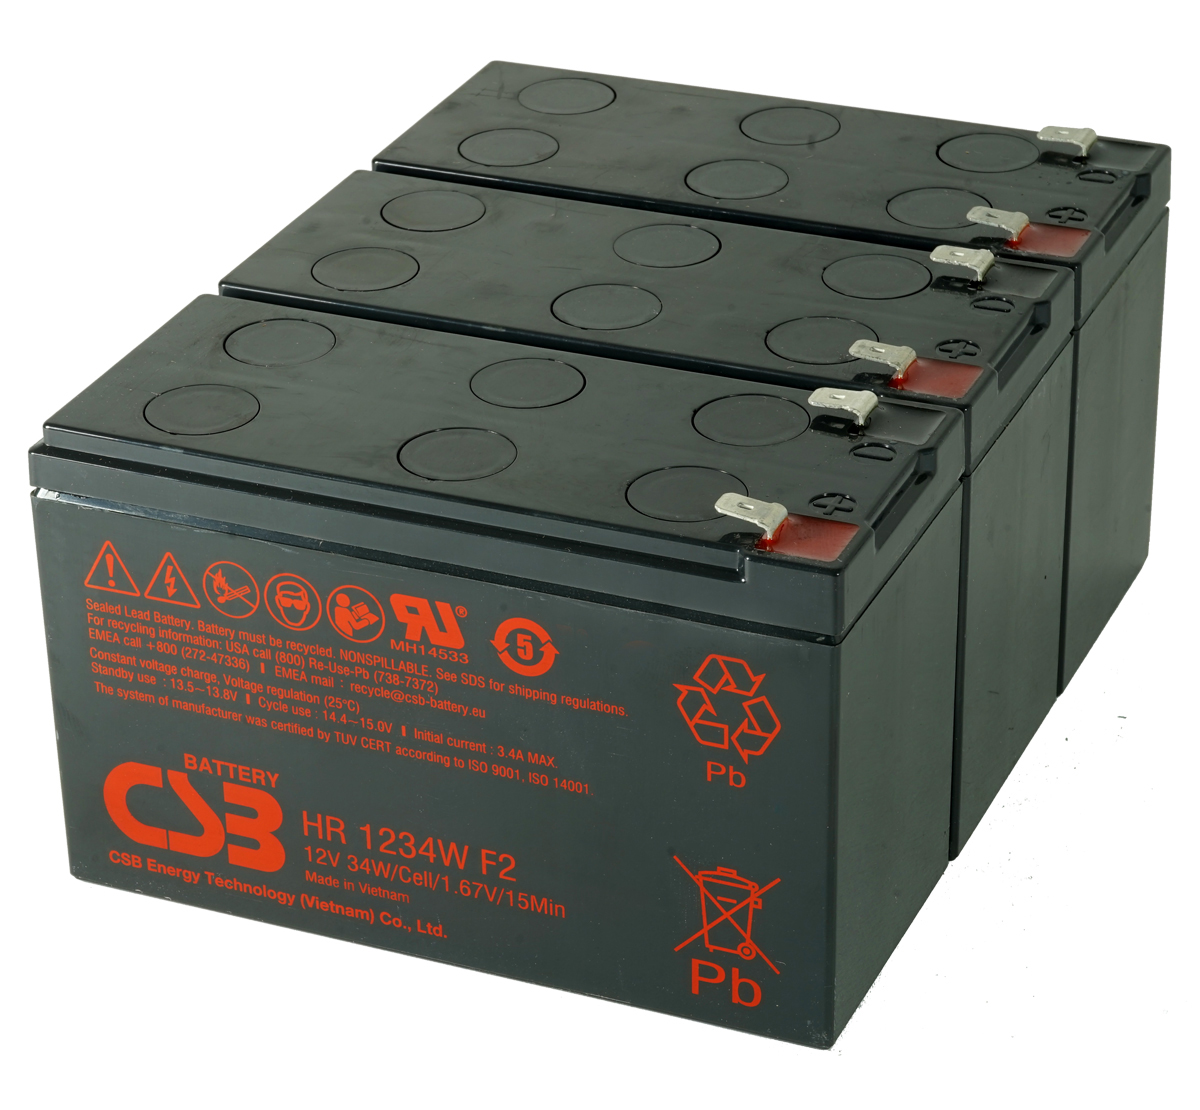 MDS2303 UPS Battery Kit for MGE AB 2303